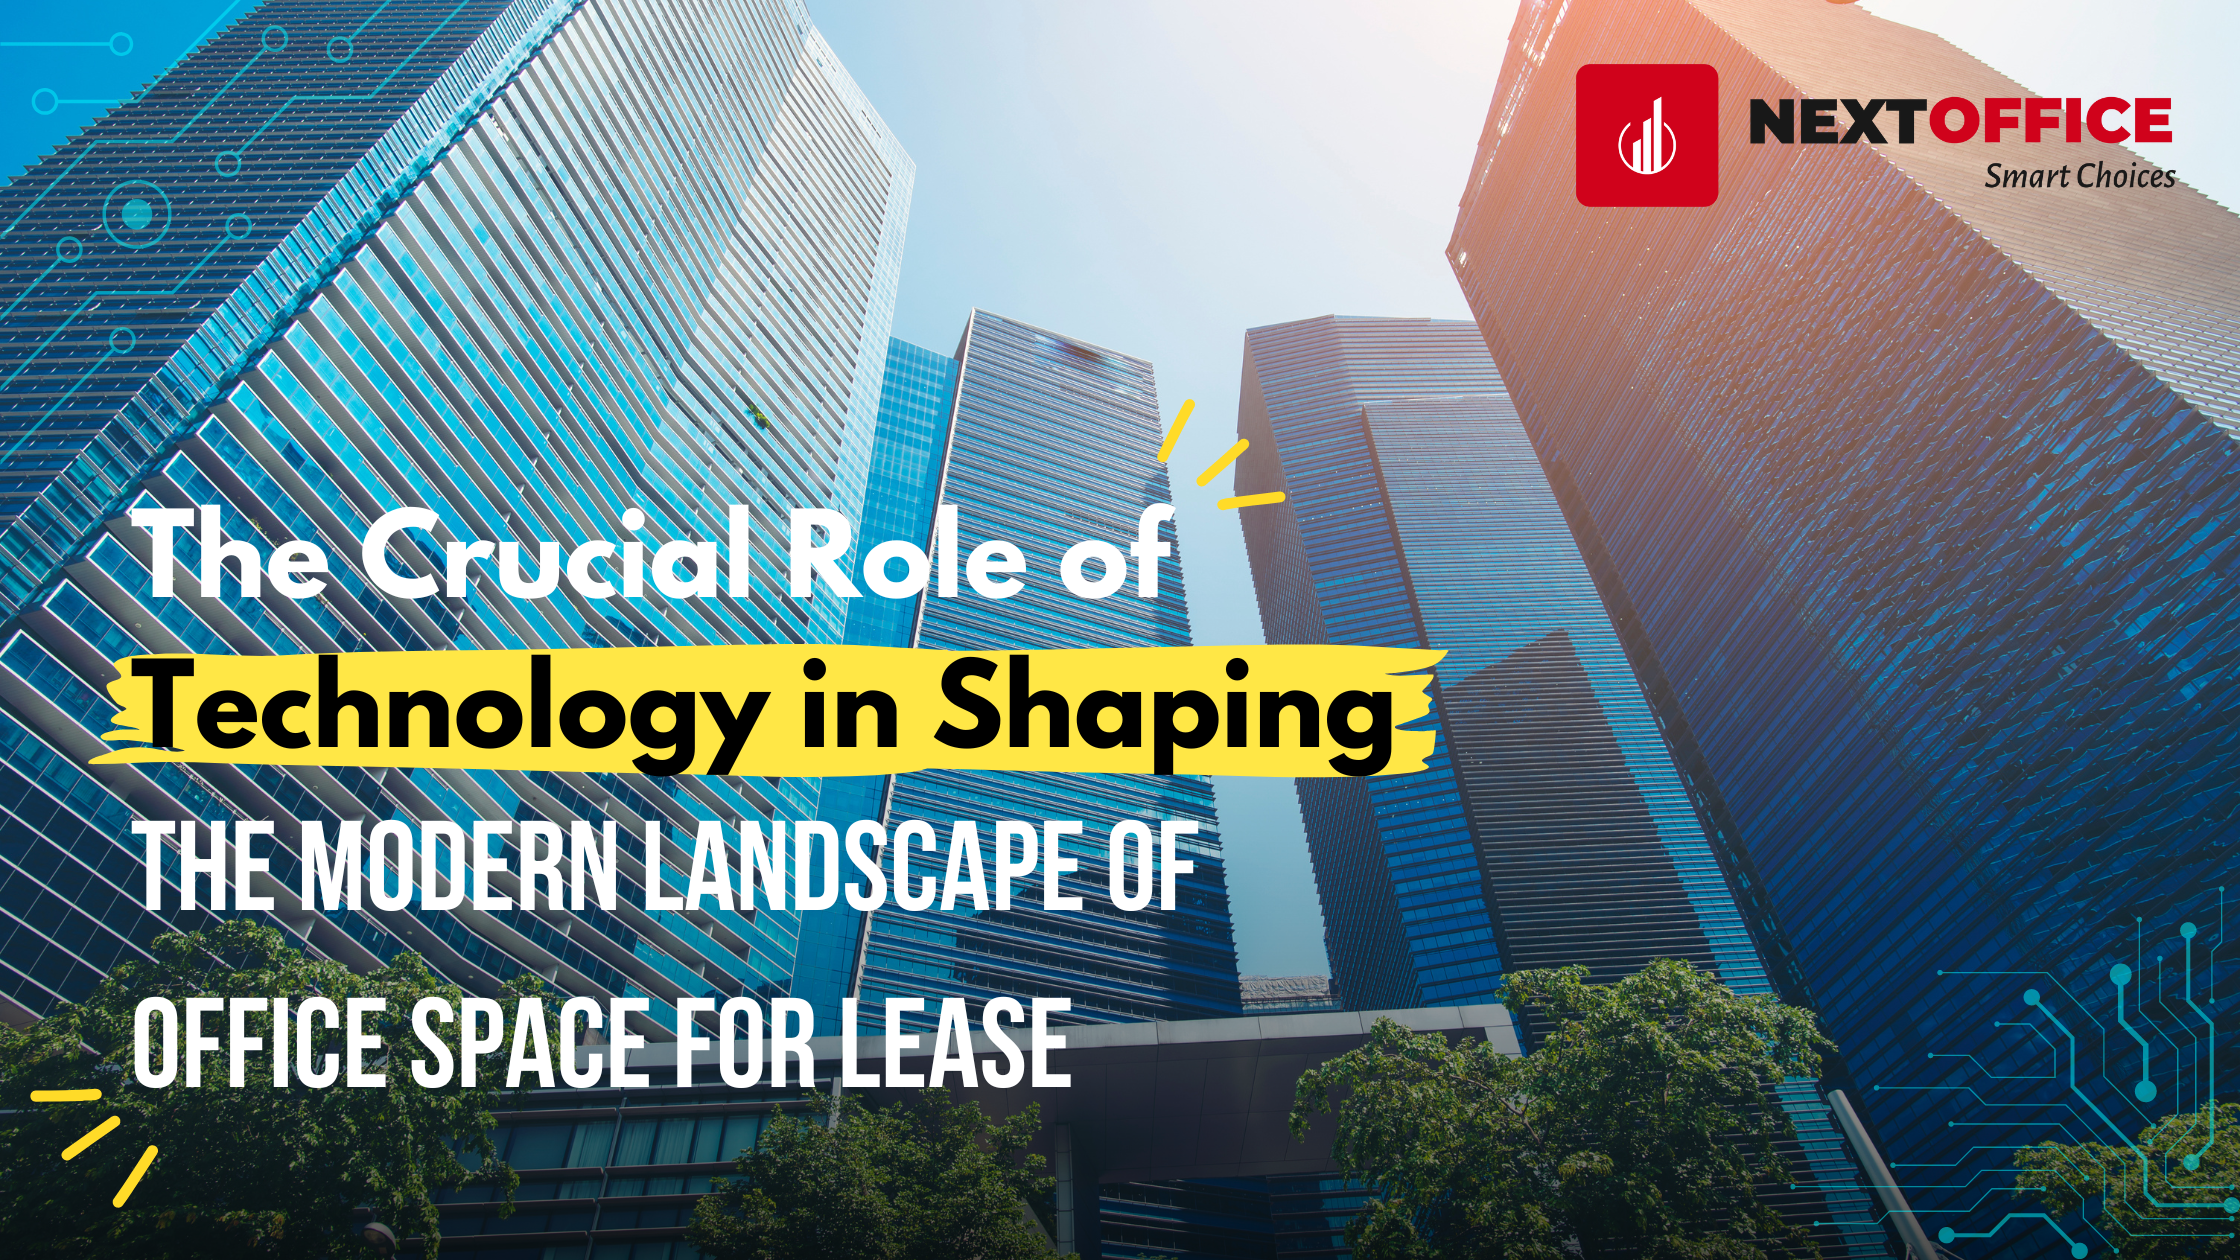 The Crucial Role of Technology in Shaping the Modern Landscape of office space for lease